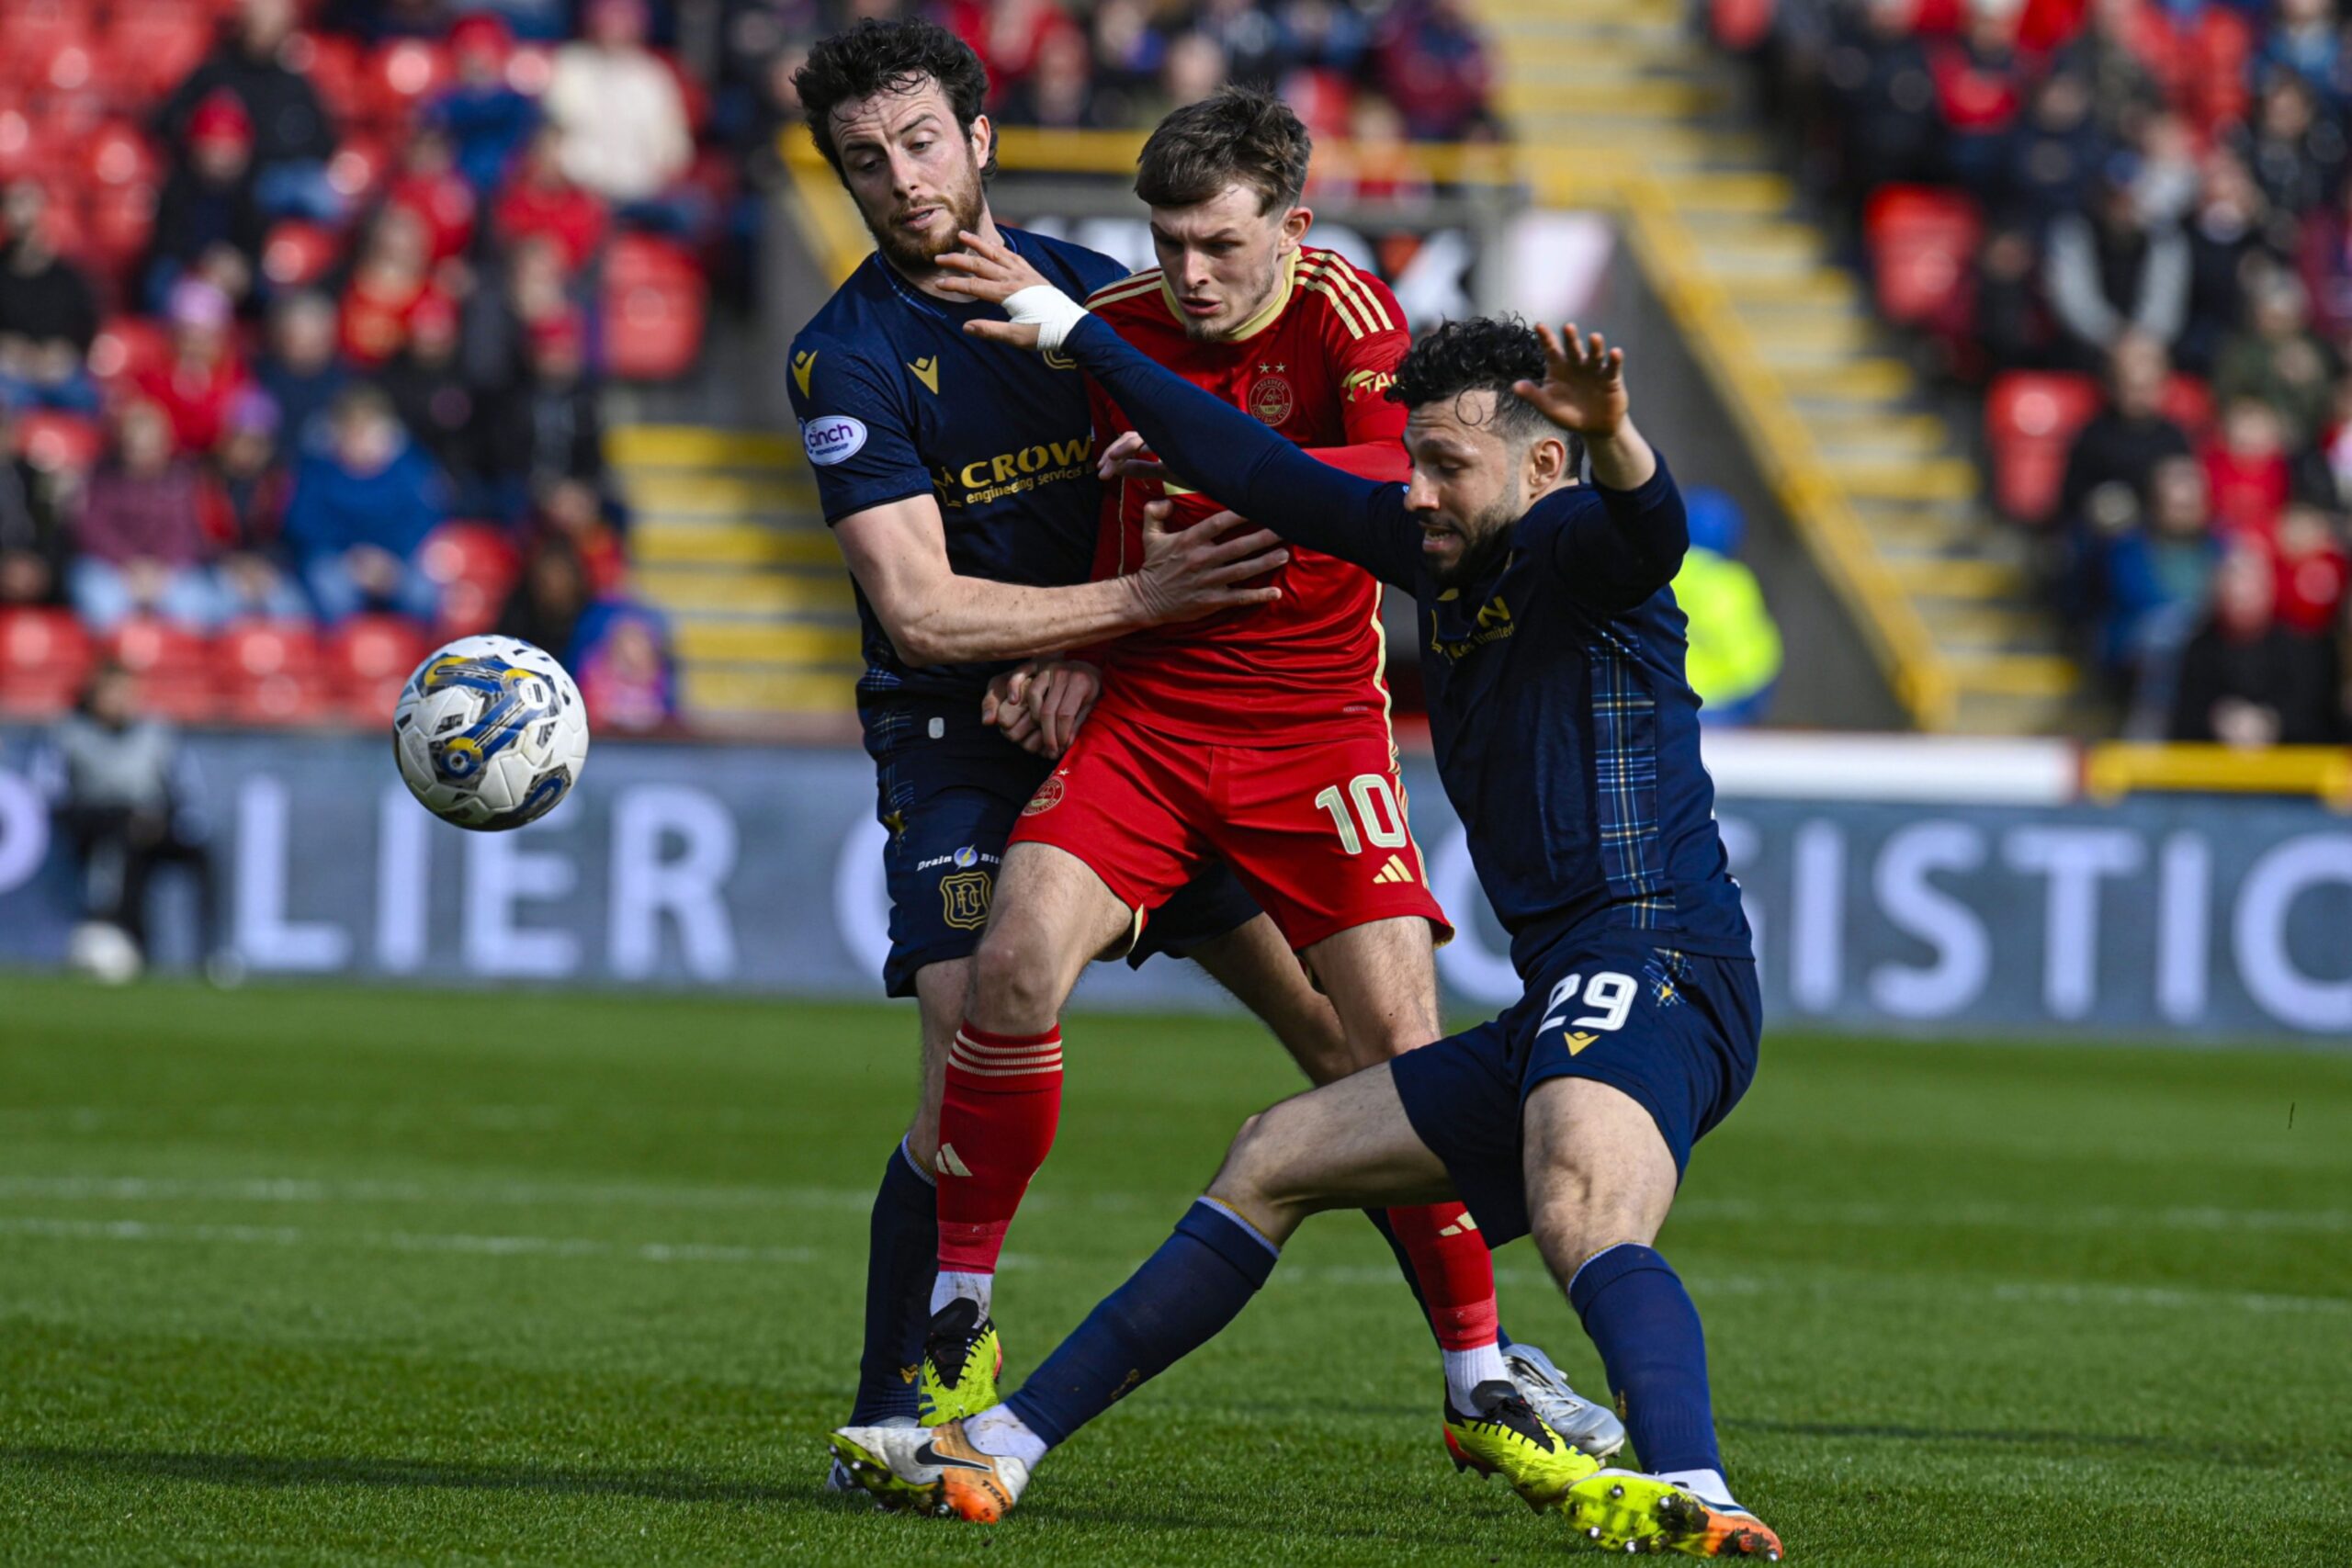  Dundee's Joe Shaughnessy (L) and Antonio Portales (R) and Aberdeen's Leighton Clarkson in action during a 0-0 draw at Pittodrie. Image: SNS 